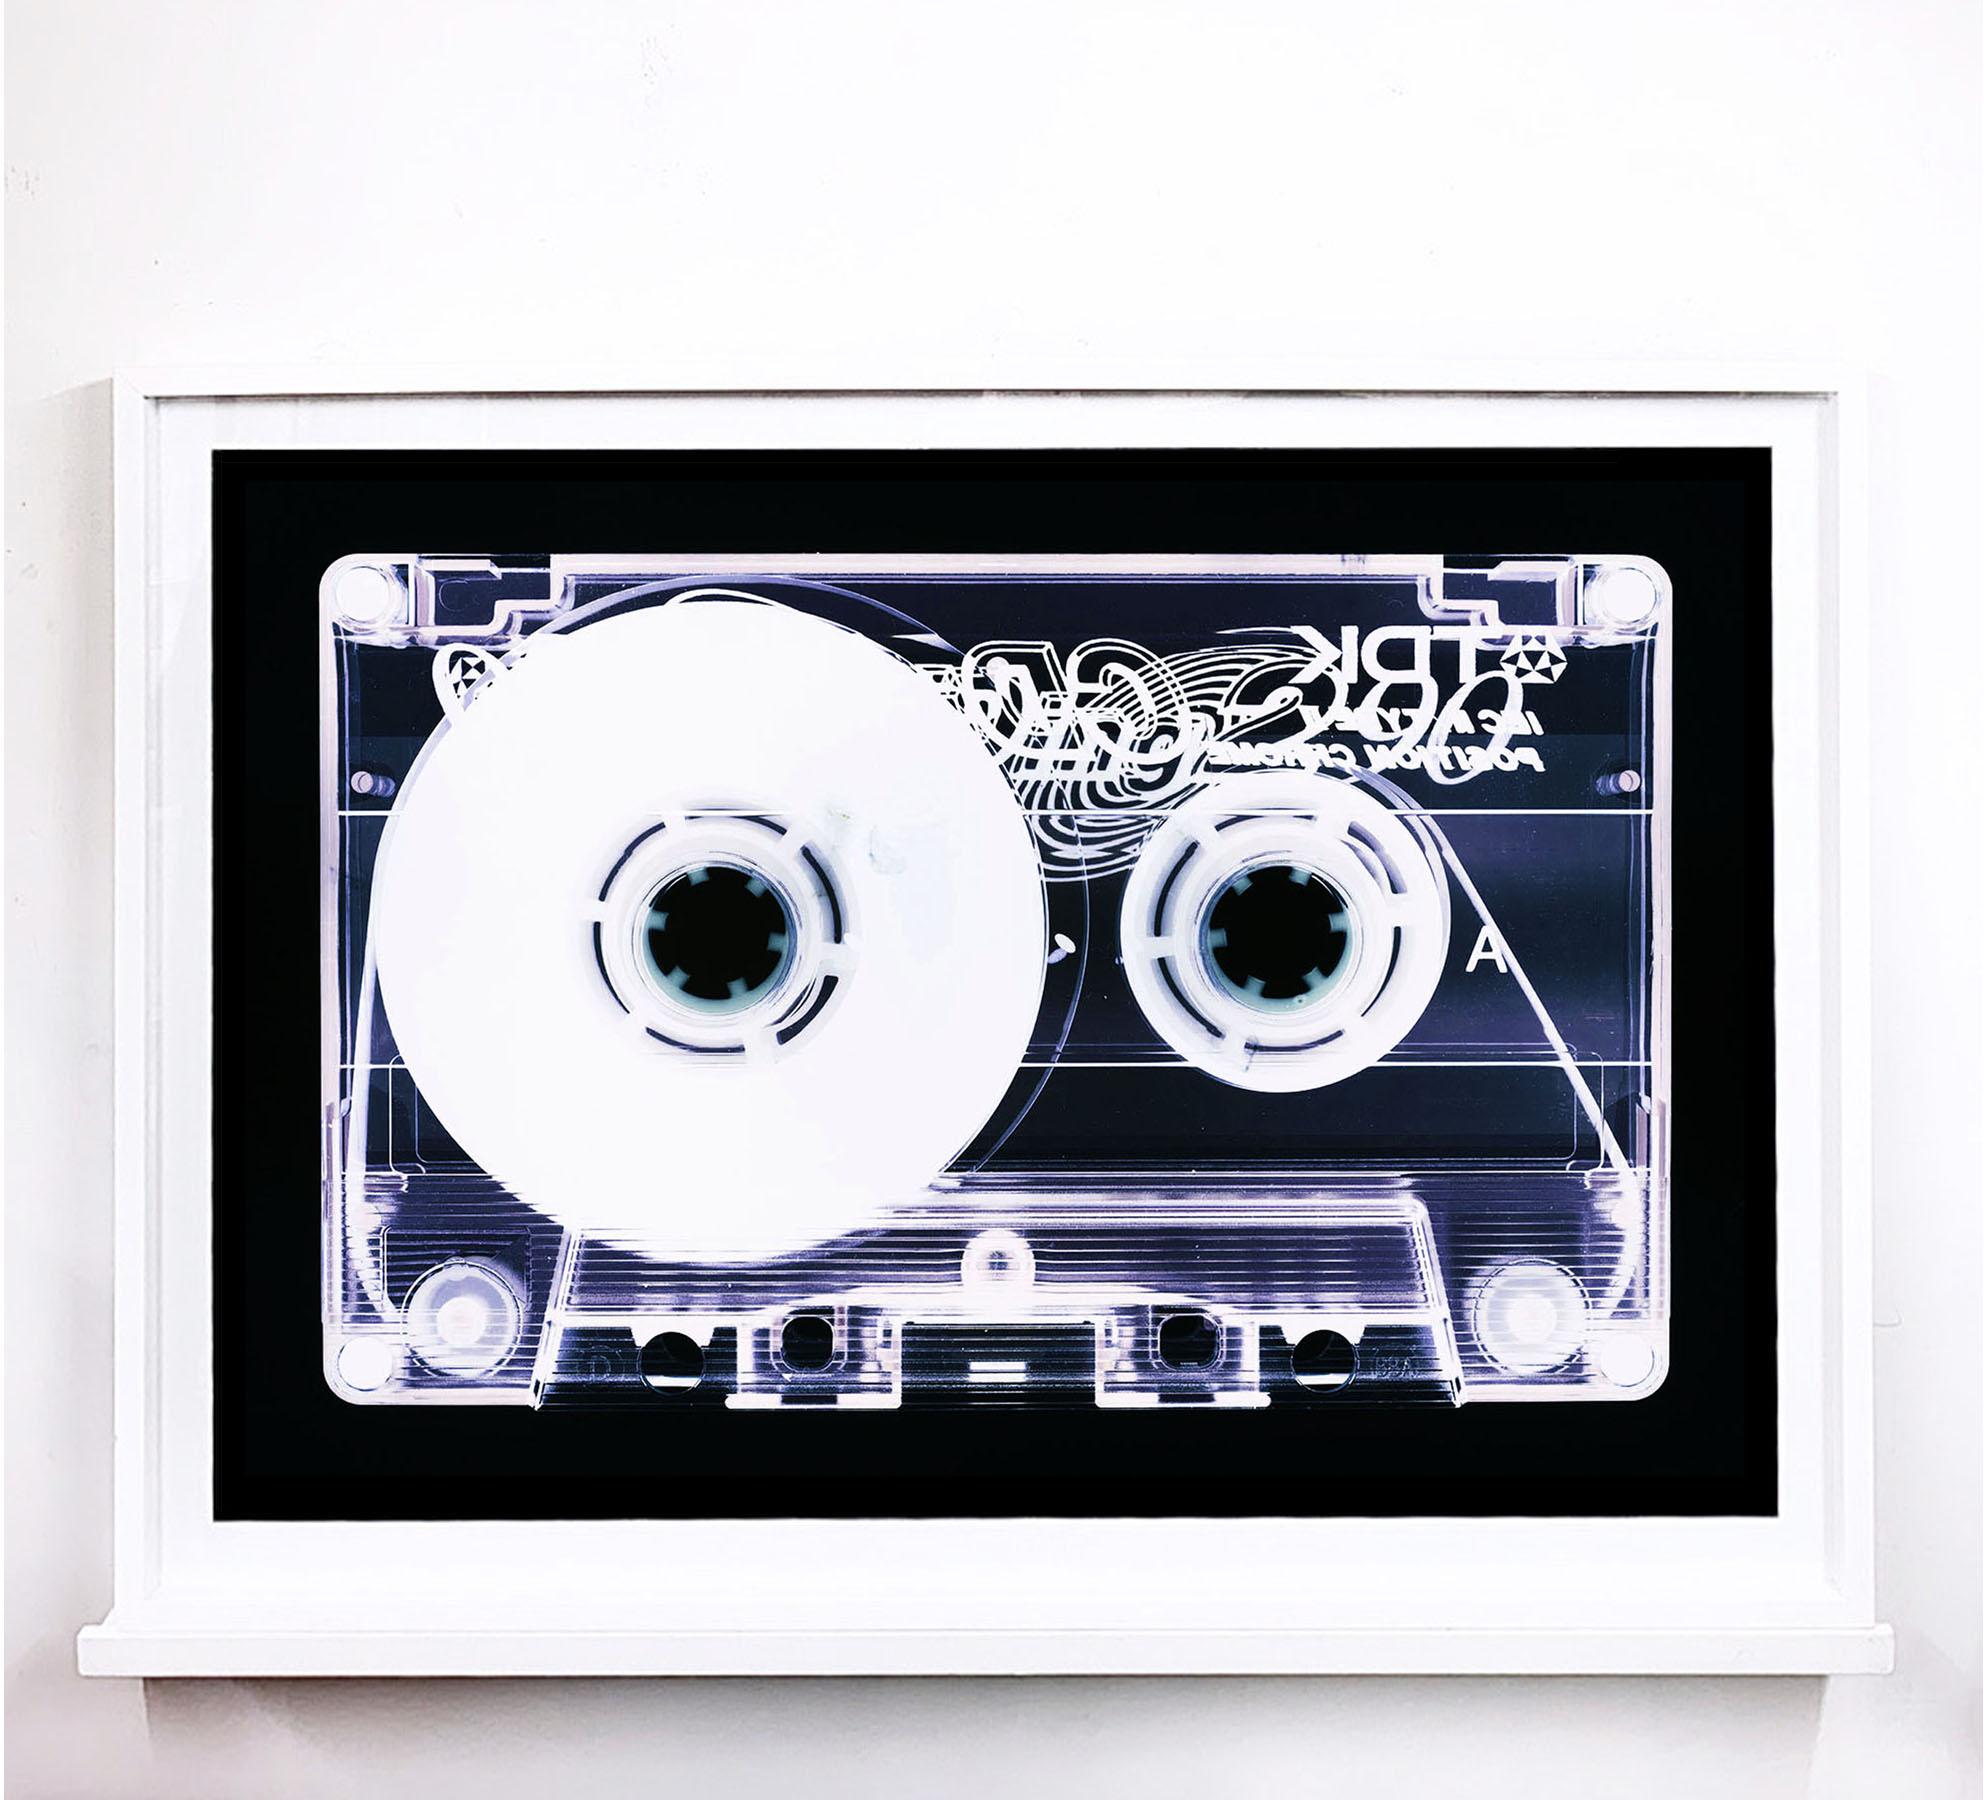 Tape Collection, Blank Tape Side A - Contemporary Pop Art Color Photography - Black Print by Heidler & Heeps